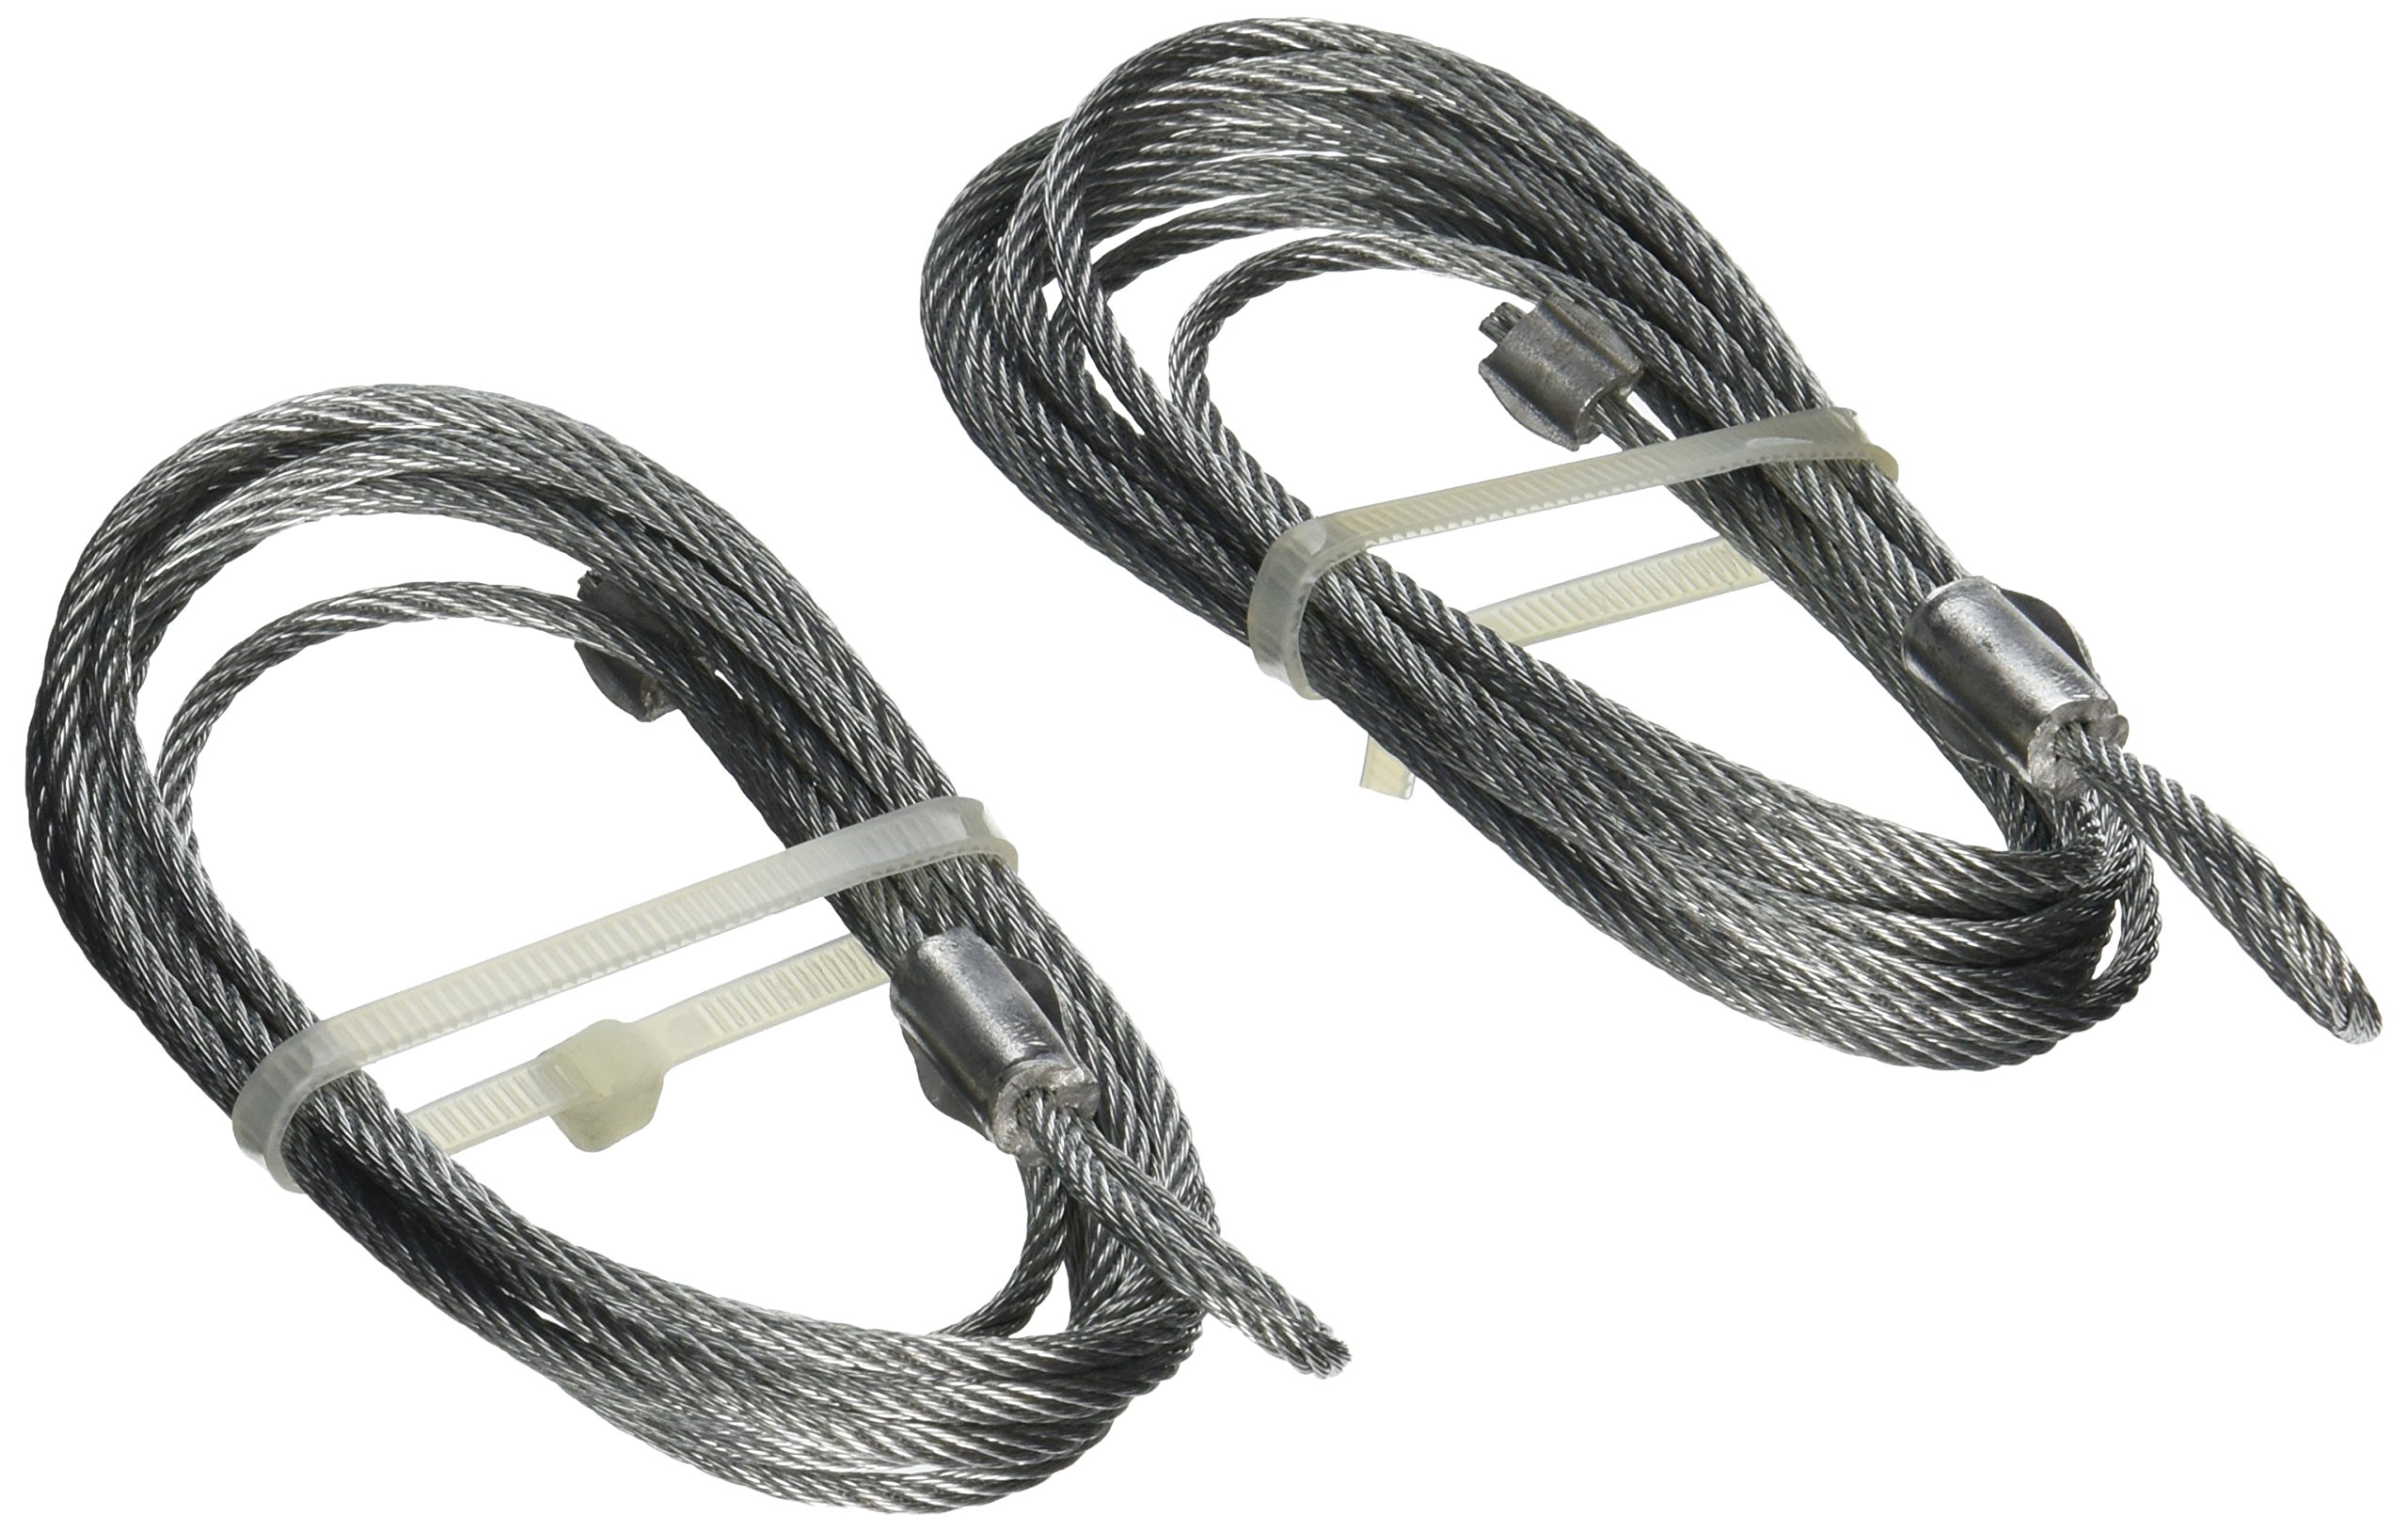 2-Pack 1/8" x 8'-8" Prime-Line Torsion Spring Cables $5.09 + Free Shipping w/ Prime or on $35+